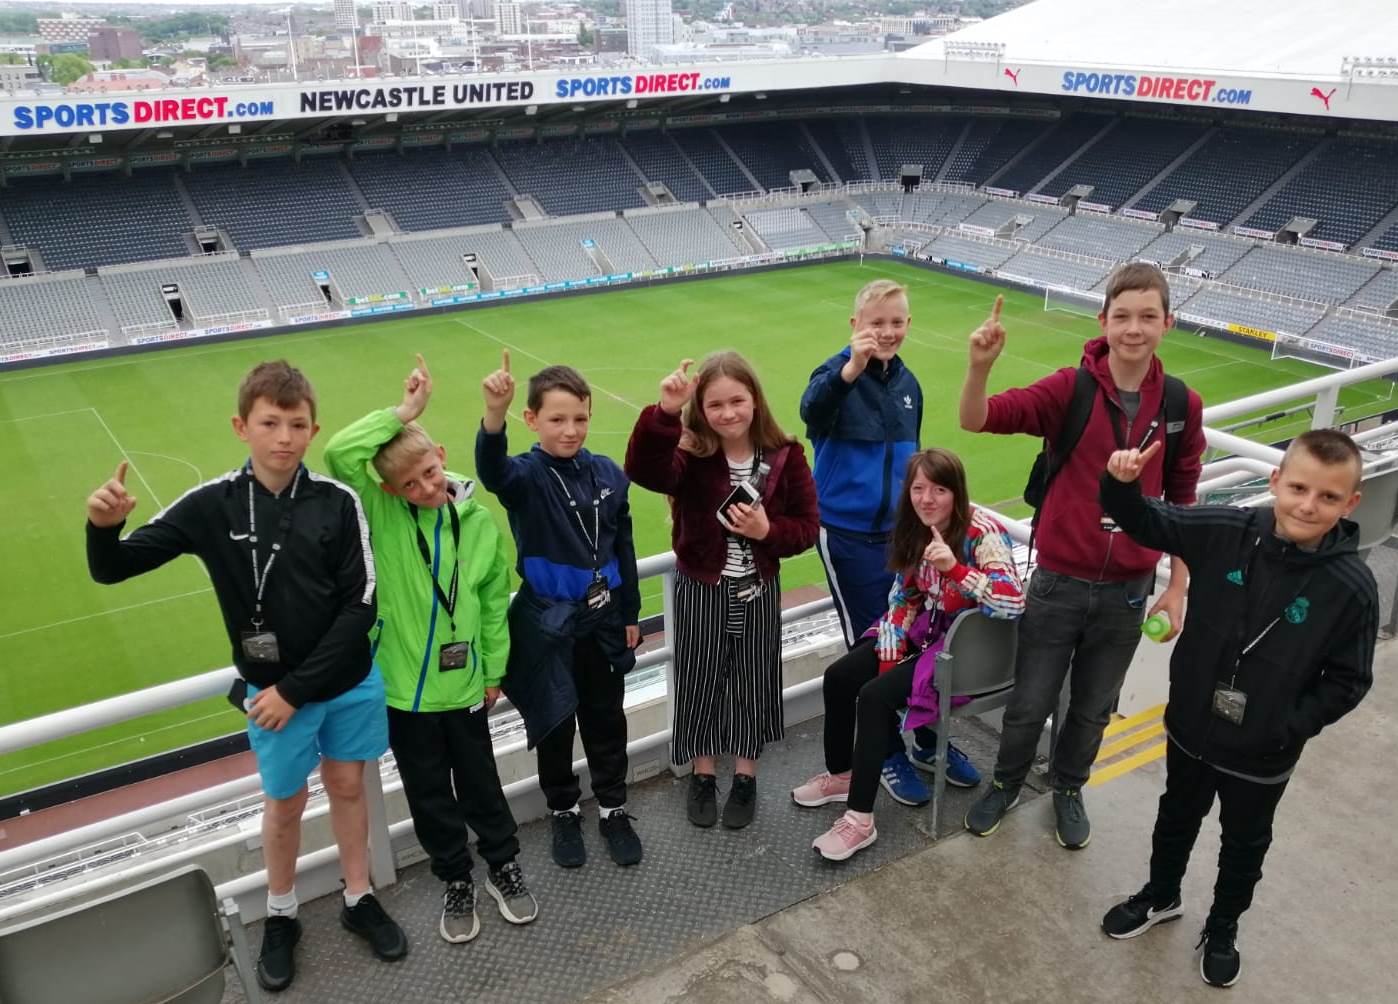 Siblings Support Group at St James' Park